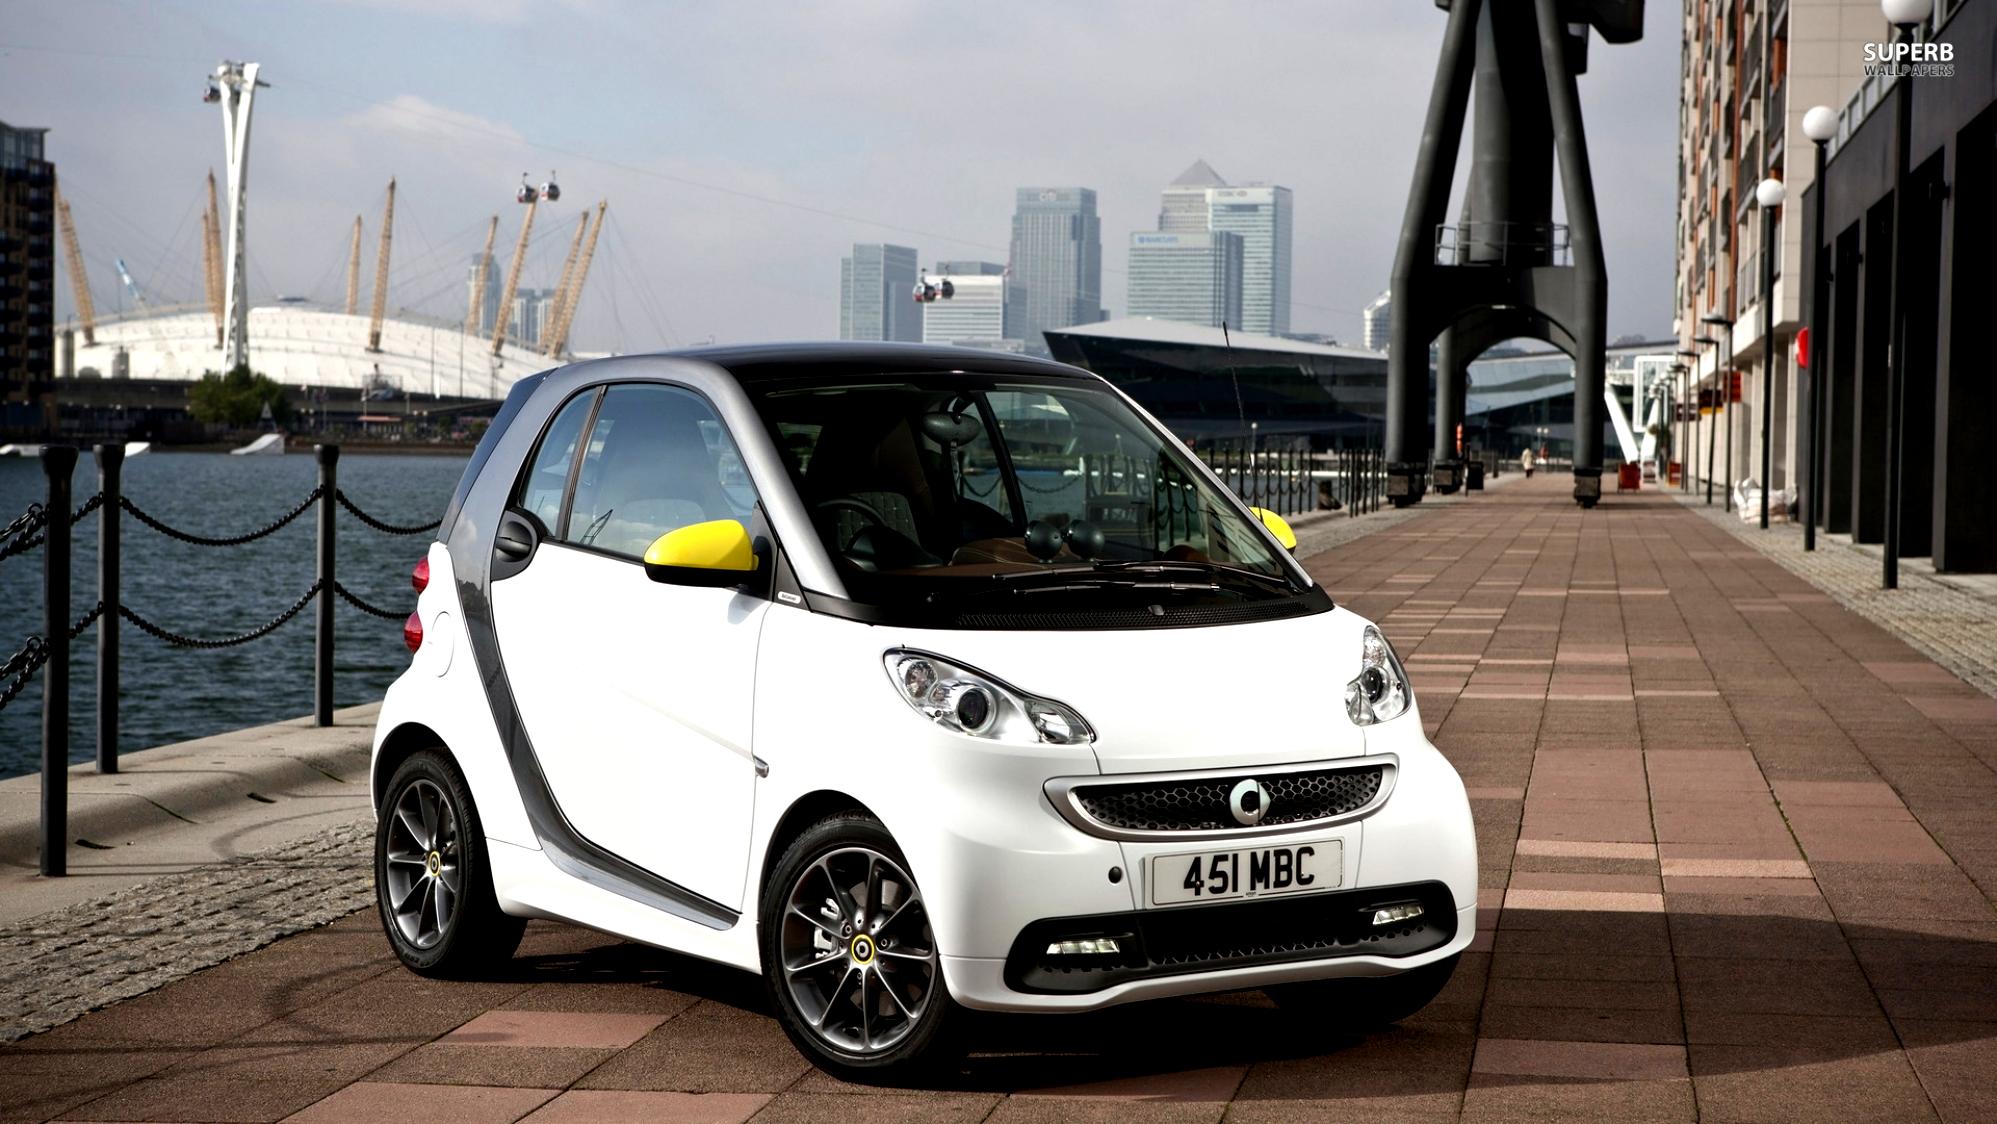 Smart Fortwo 2014 #100